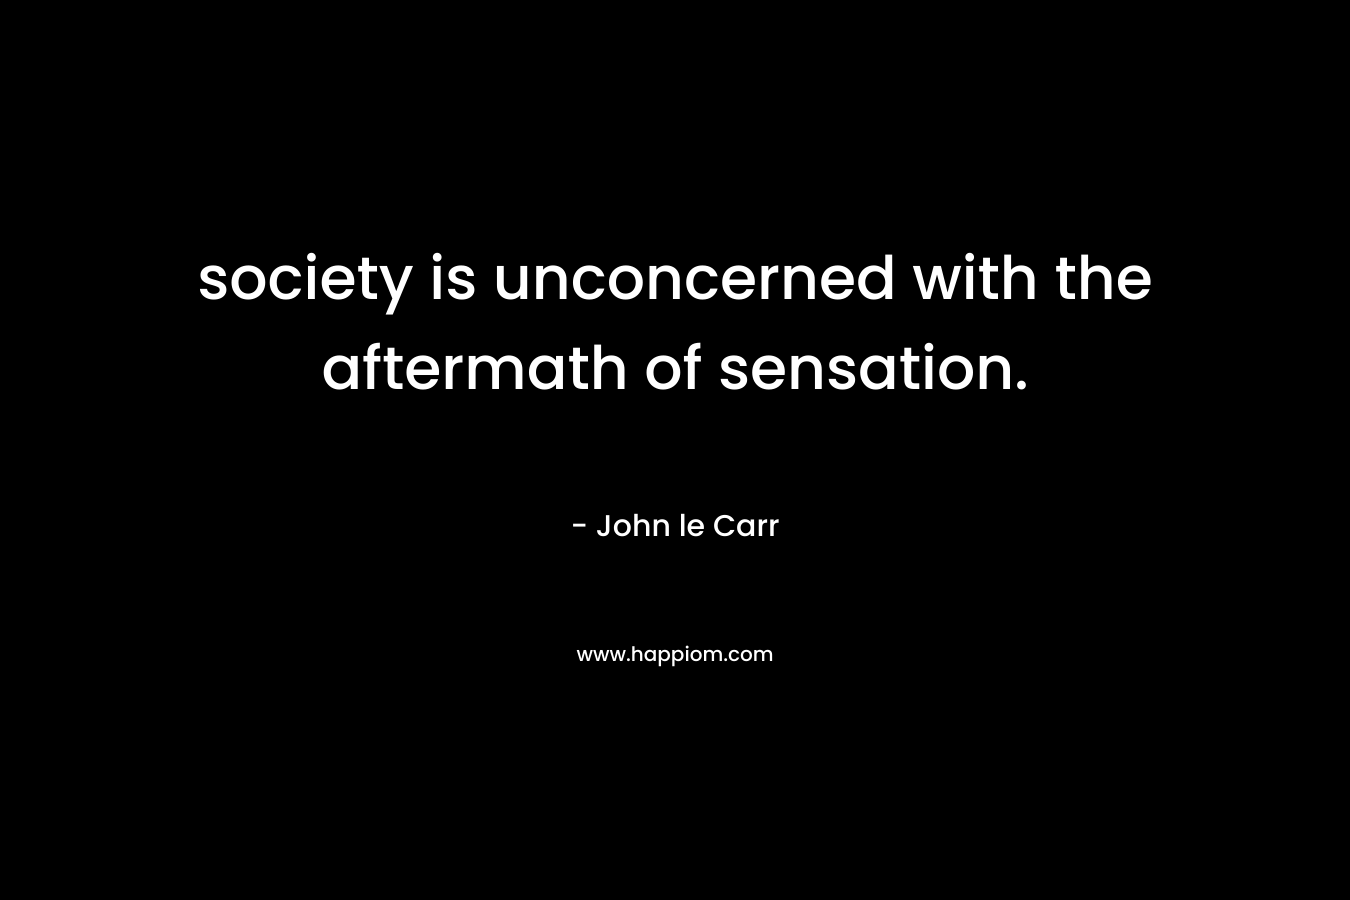 society is unconcerned with the aftermath of sensation. – John le Carr